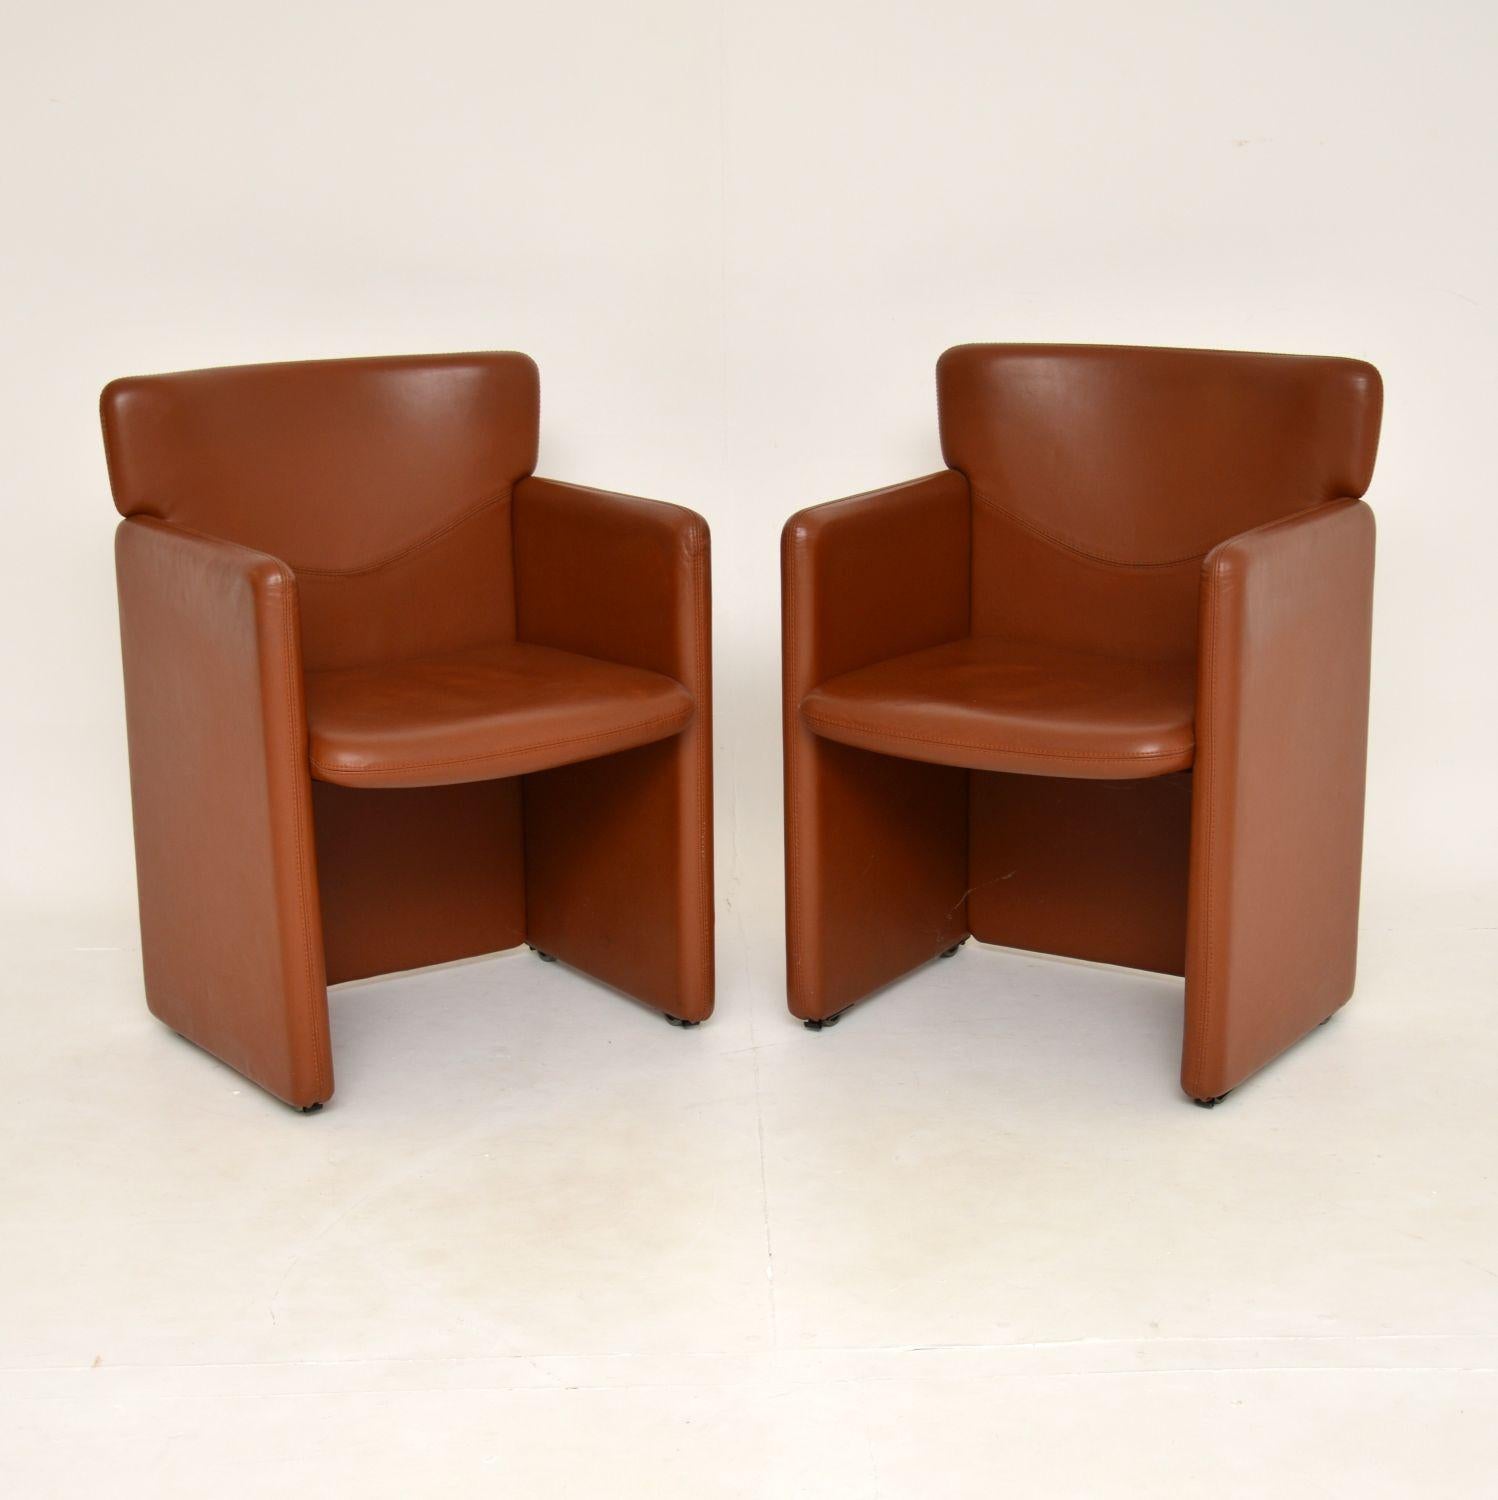 A fantastic and quite unusual pair of vintage tanned leather armchairs. These were made in England, they date from around the 1970’s.

They are of quite small proportions, but are still very comfortable and supportive. The bases have wheel that